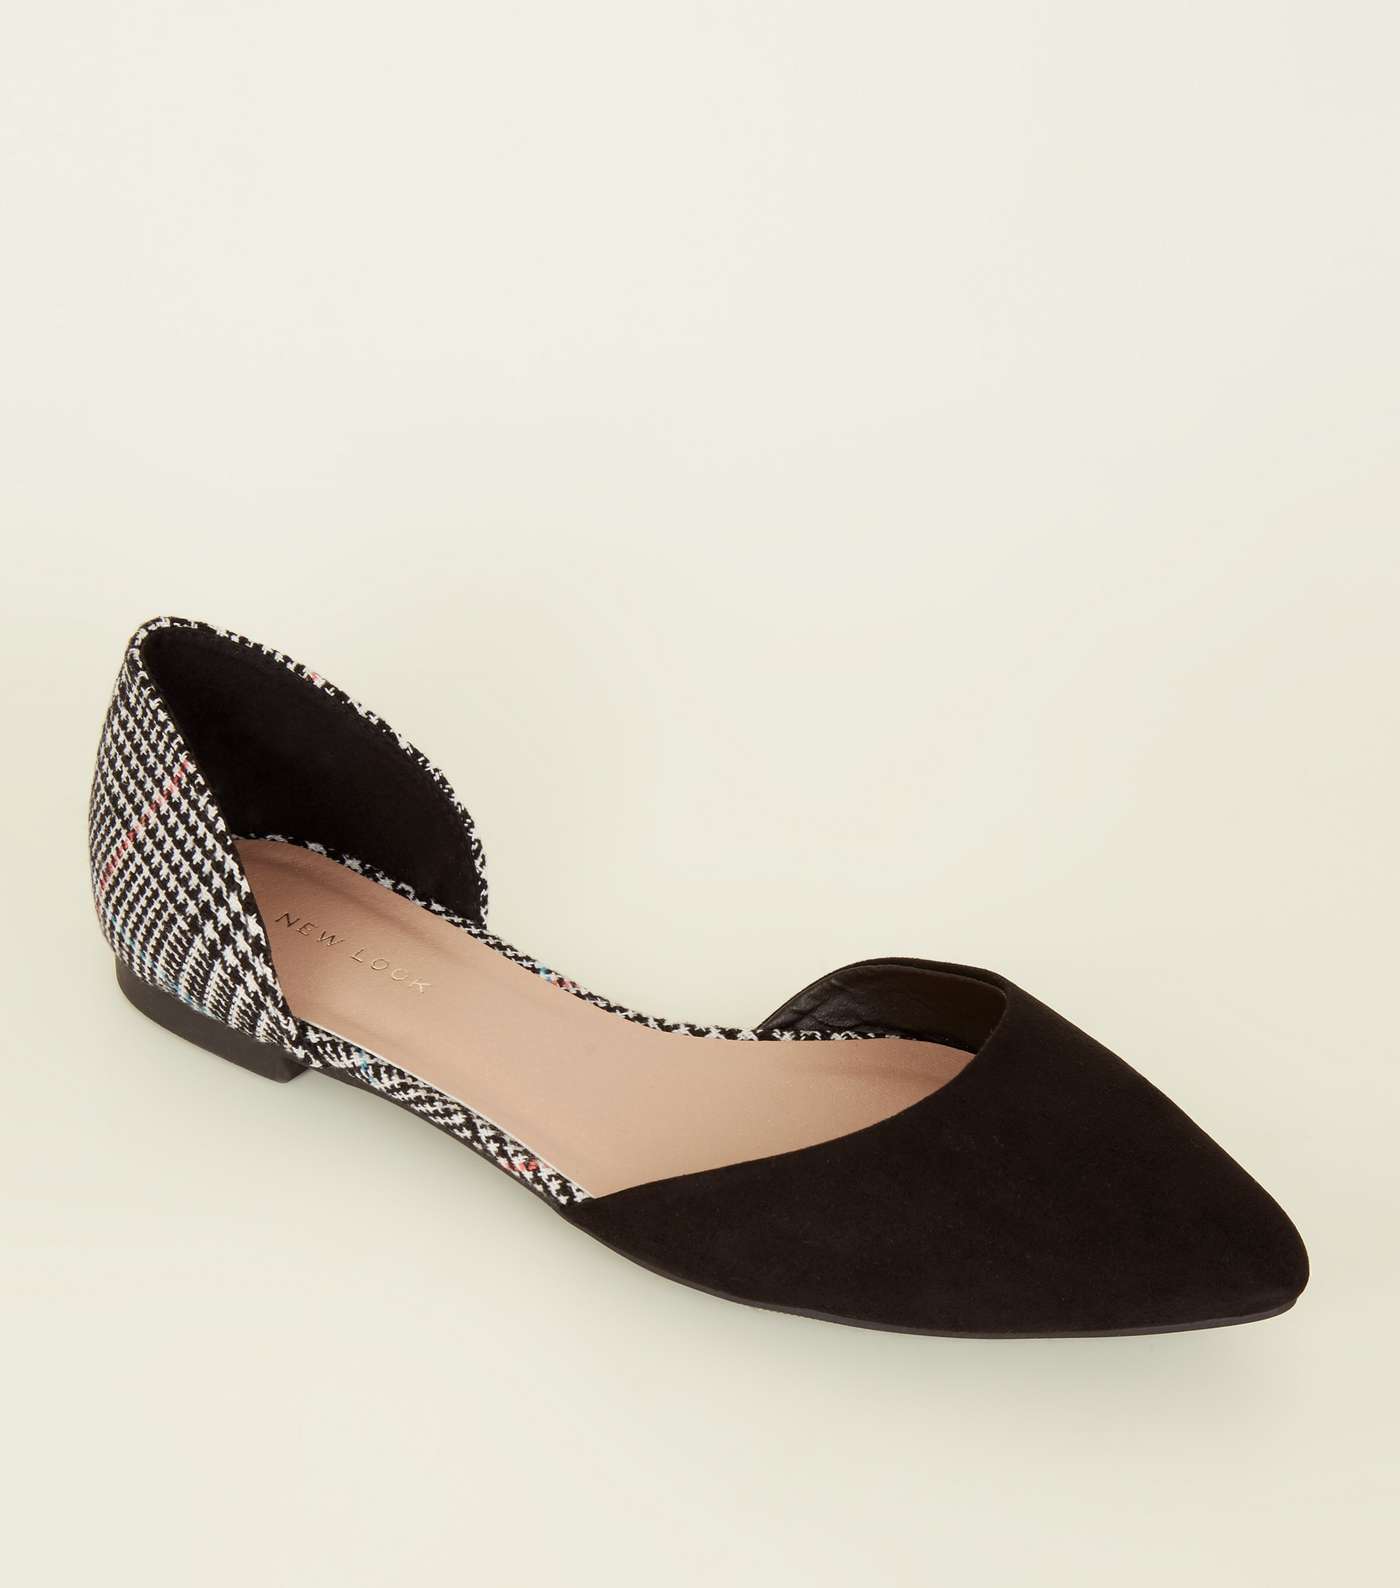 Black Woven Houndstooth Pointed Ballet Pumps